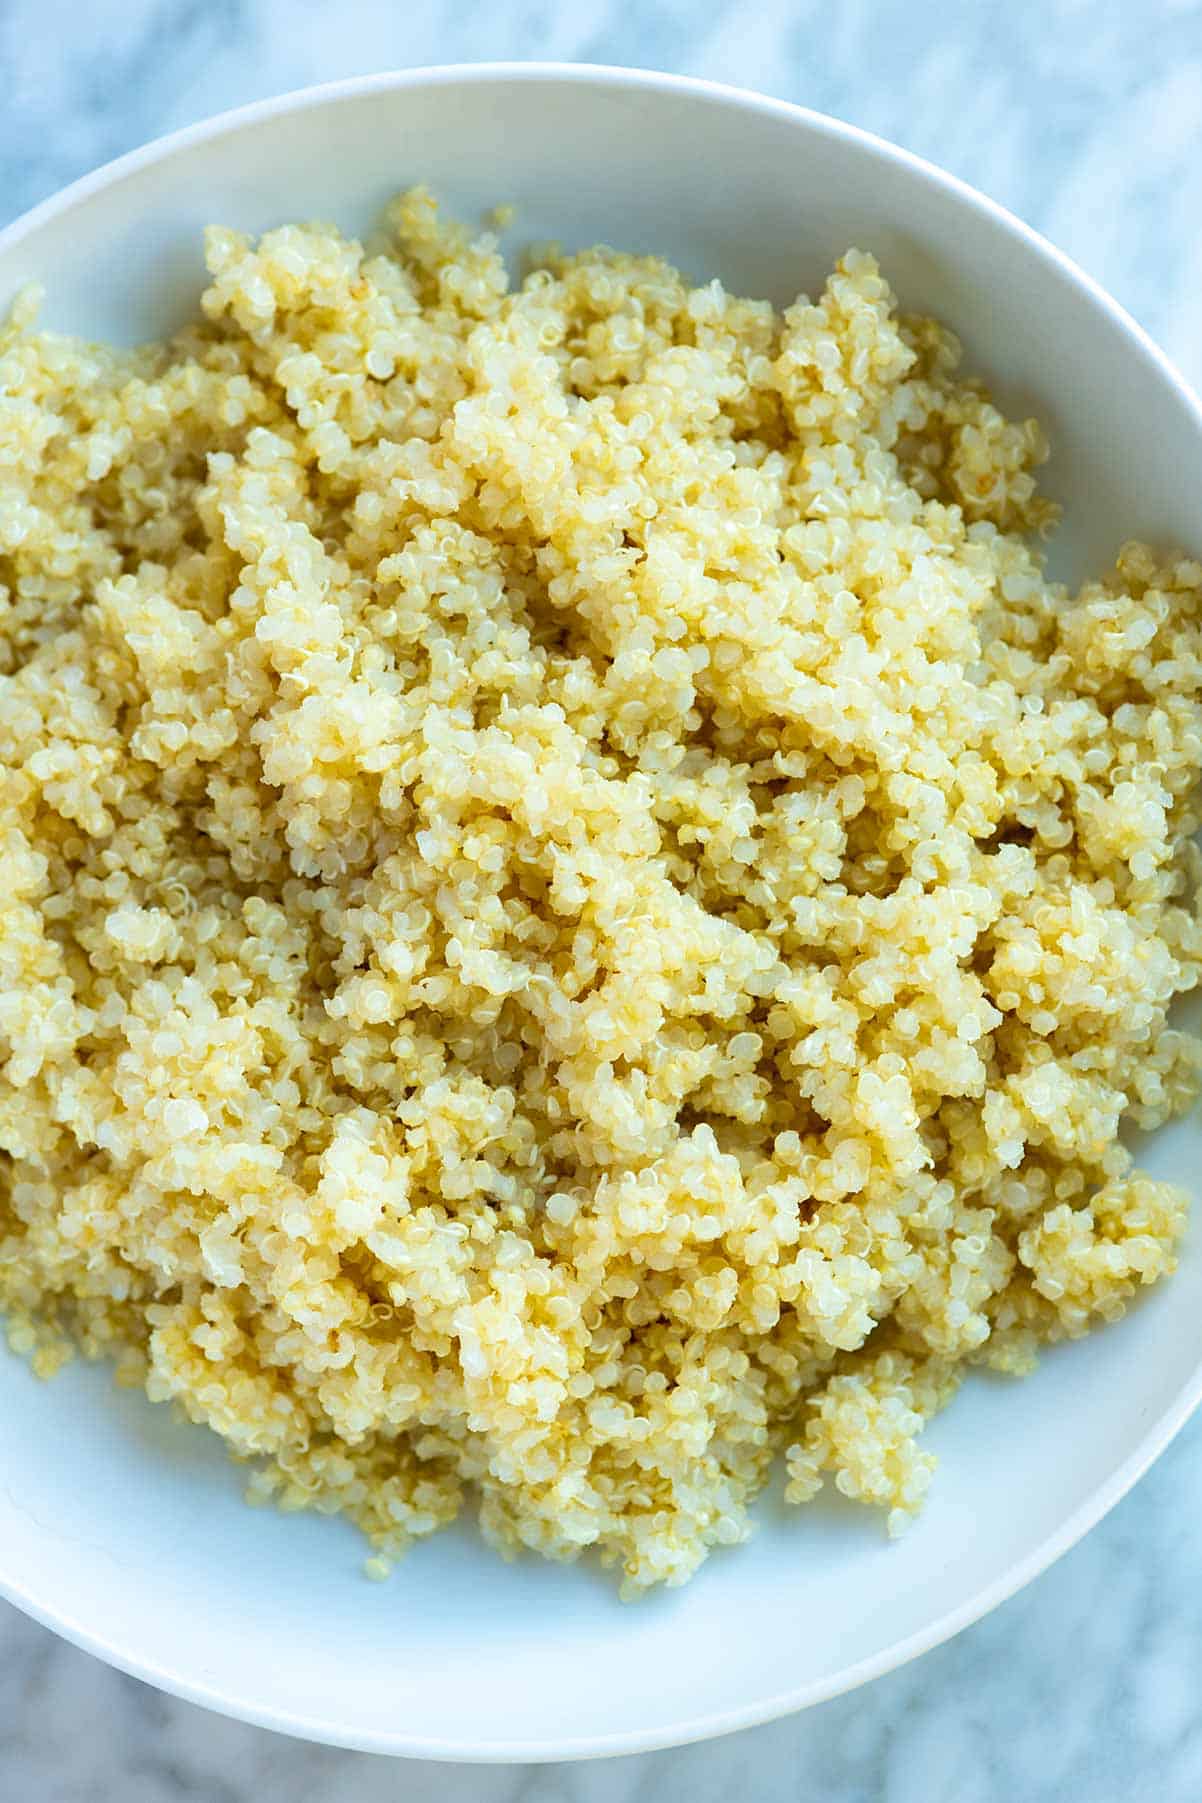 How to Prepare and Cook Quinoa on the stove, in the microwave or in a pressure/rice cooker